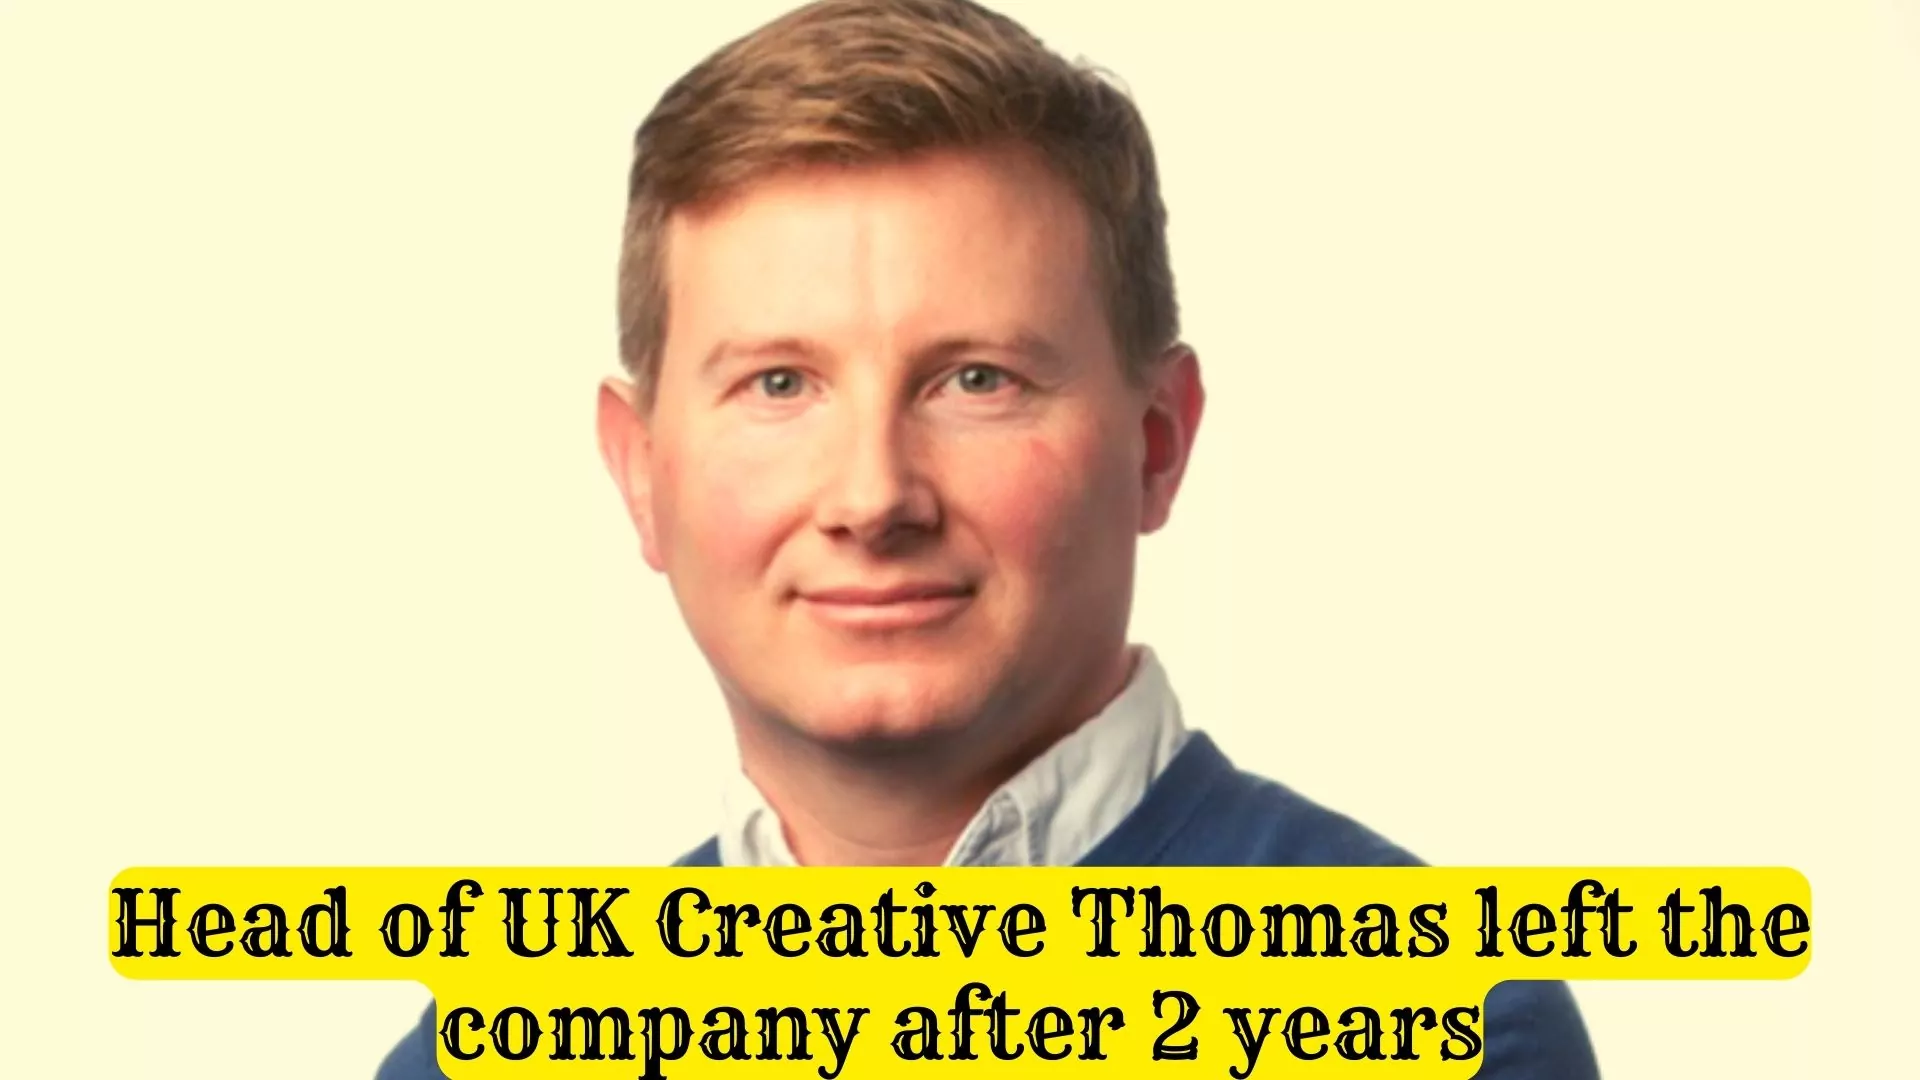 Head of UK Creative Thomas left the company after 2 years